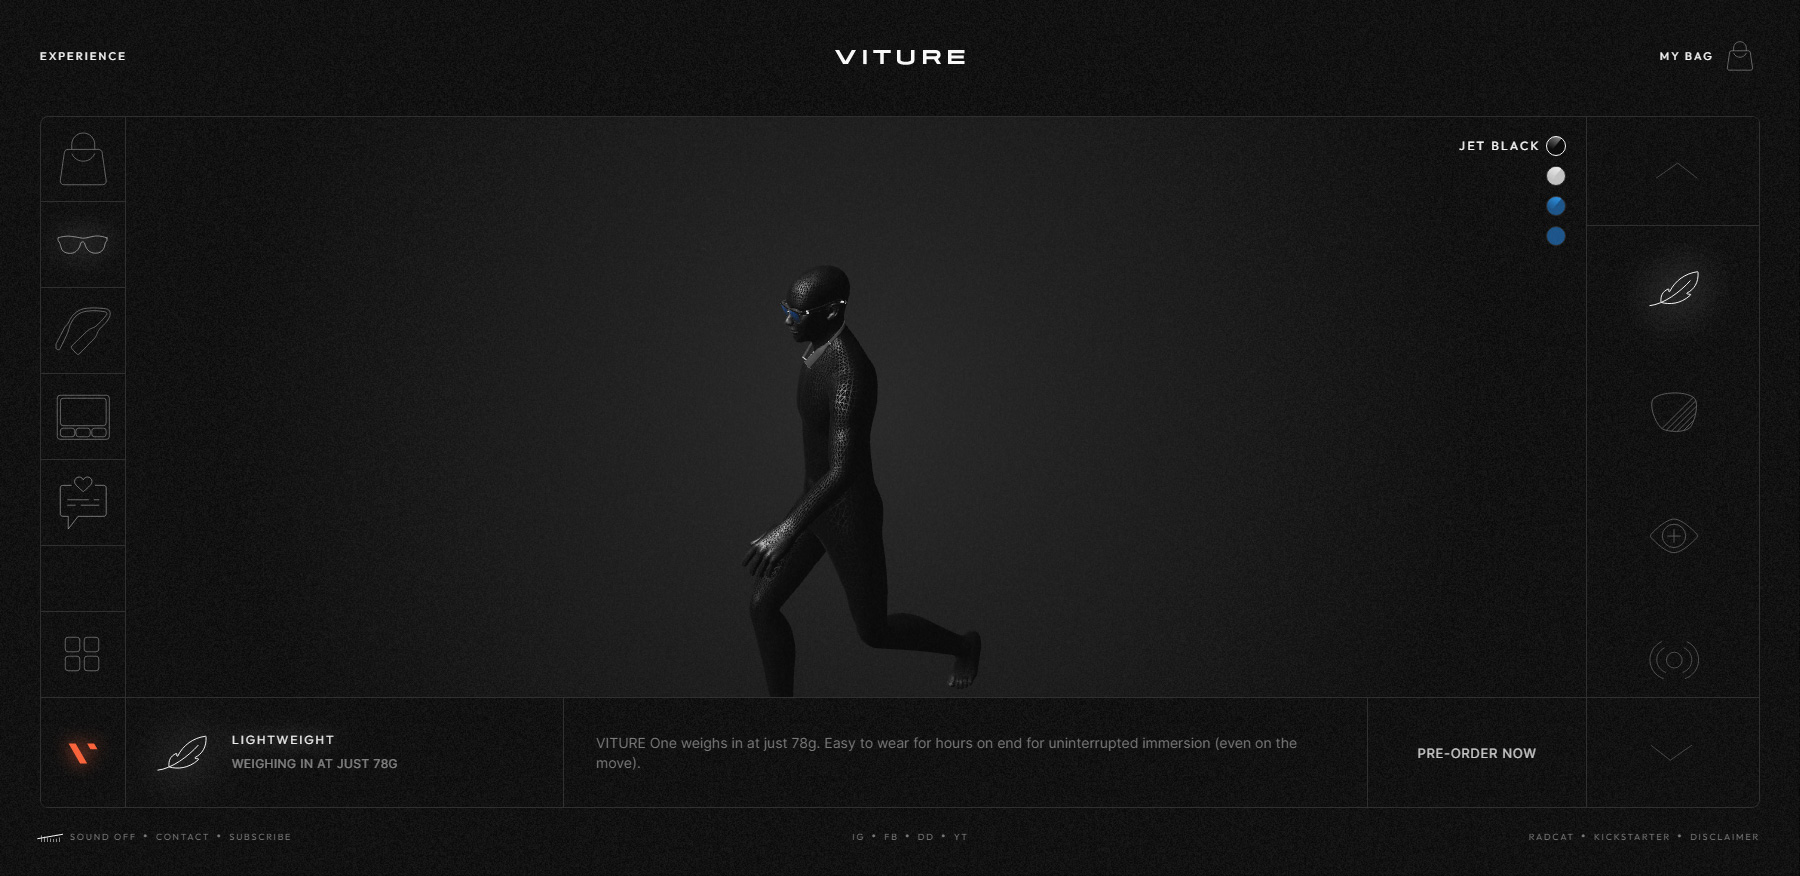 Viture - Website of the Day